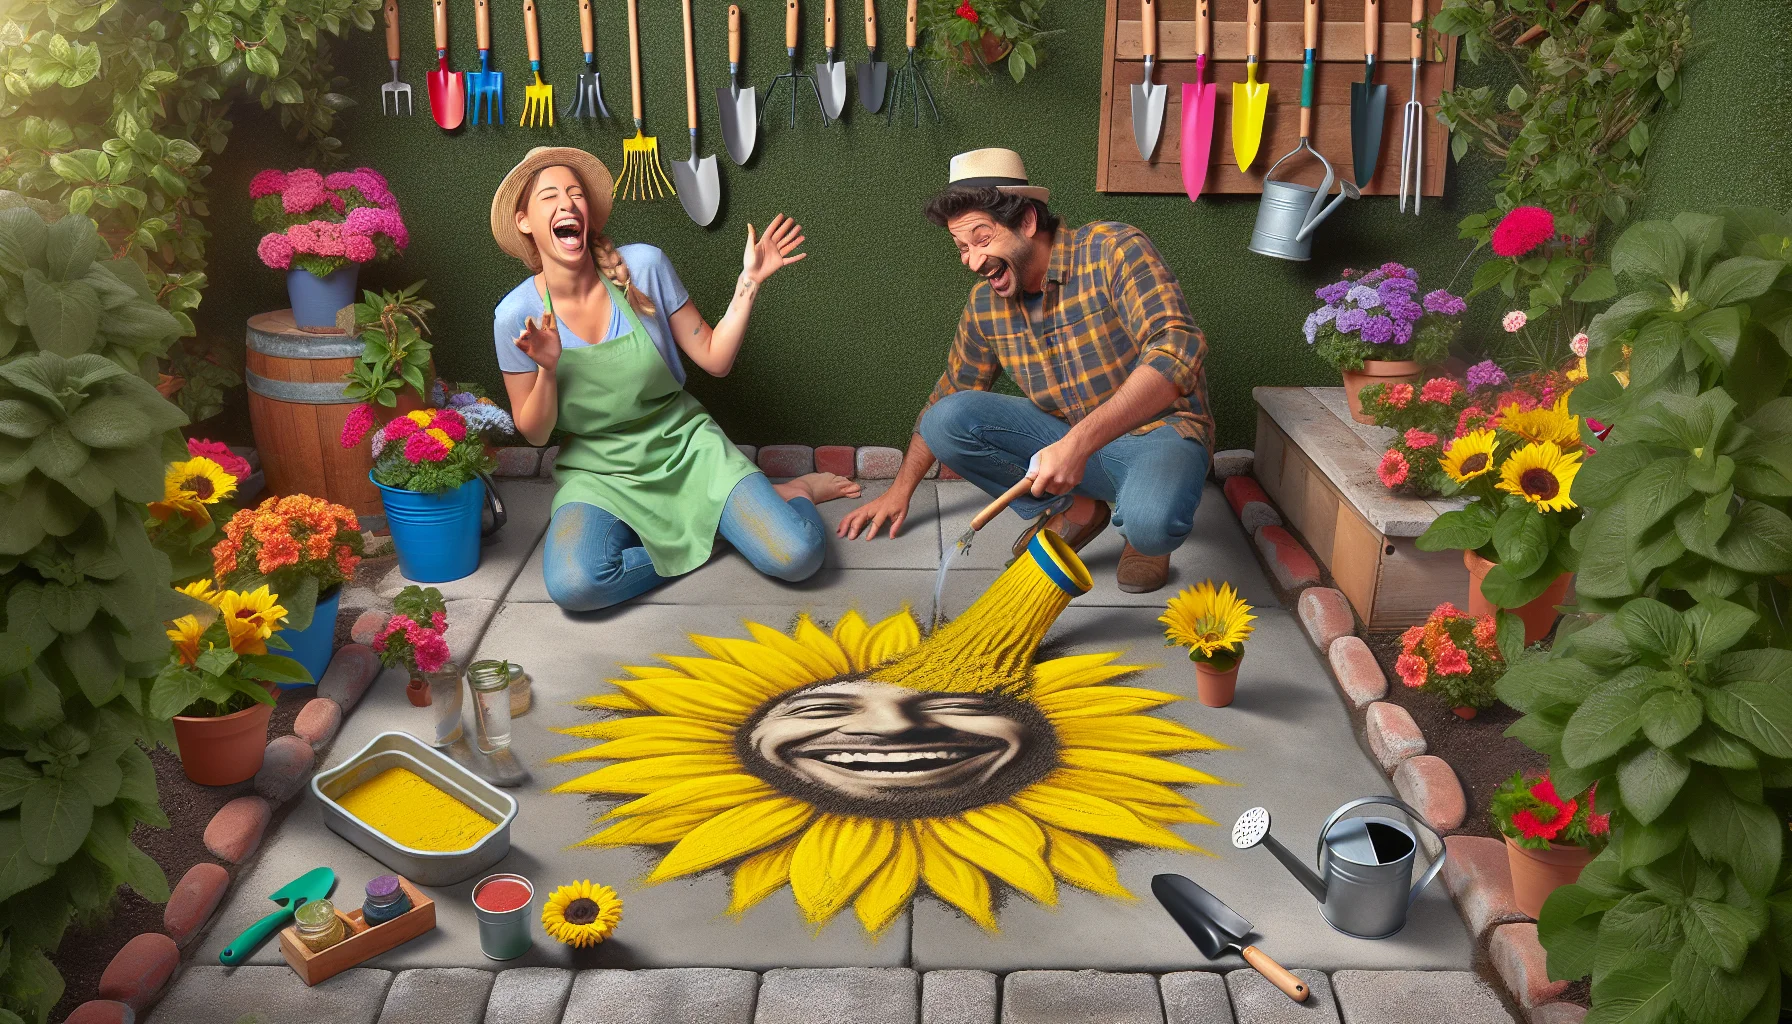 Create a humorous, realistic image that depicts a scene related to gardening. A man of Hispanic descent is using concrete stains to accidentally create an image of a cheerful sunflower on a garden path, while a woman of Caucasian descent laughs nearby, holding a watering can. Various gardening tools are scattered around them while vibrant-colored flowers peak through the well-tended green shrubs. The whole setting invokes a light-hearted, whimsical feel, compelling viewers to try their hand at gardening and have fun with it.